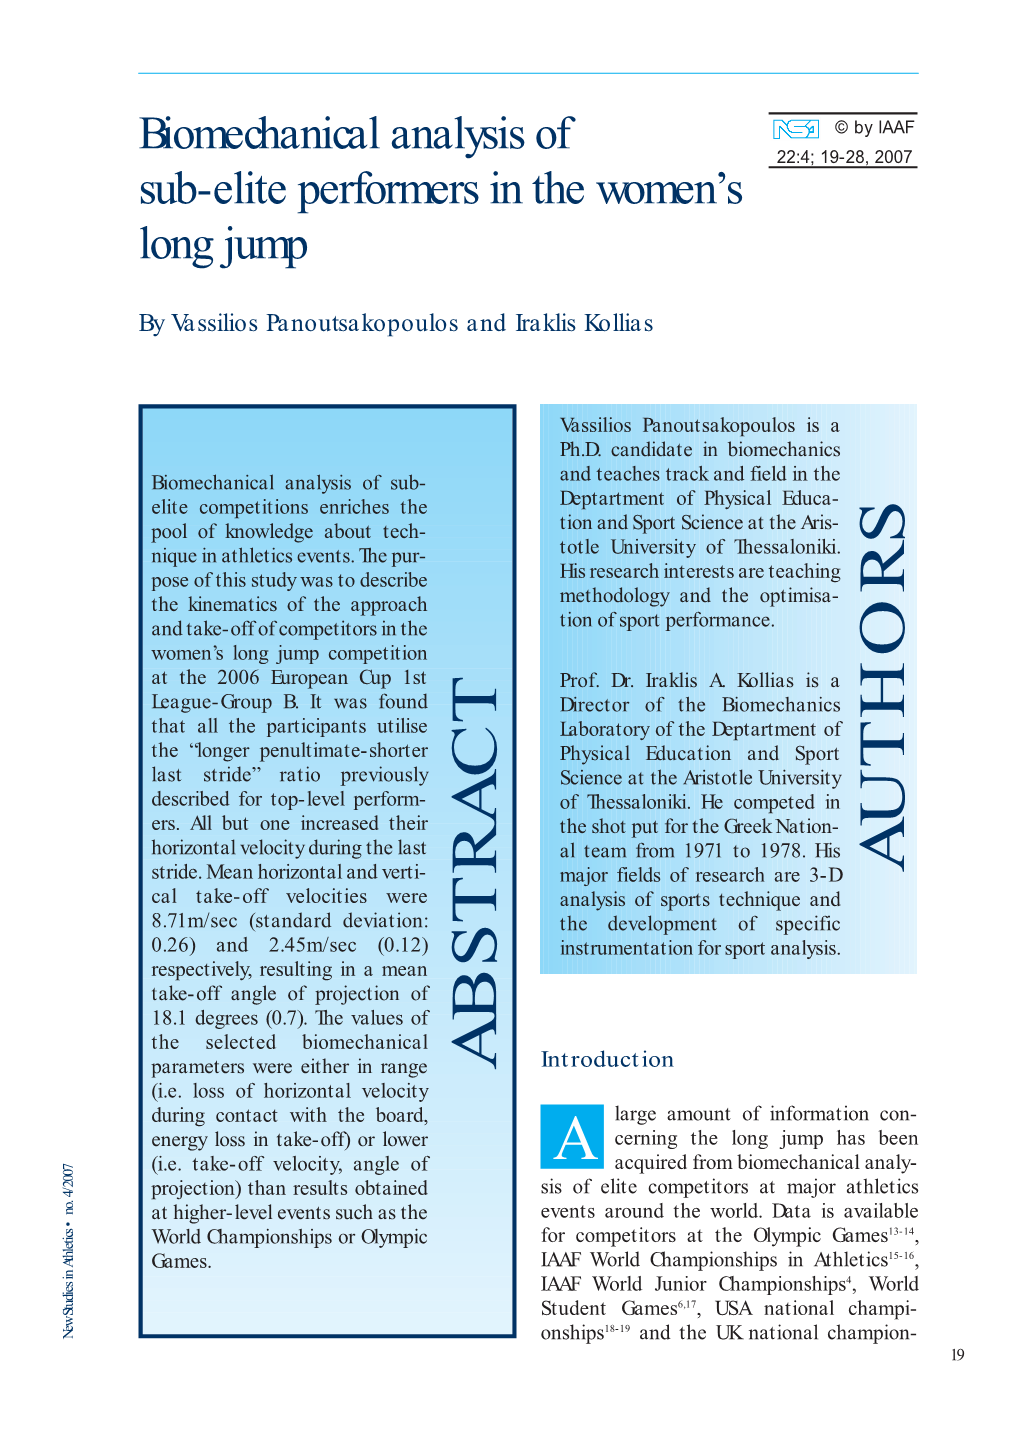 Biomechanical Analysis of Sub-Elite Performers in the Women’S Long Jump